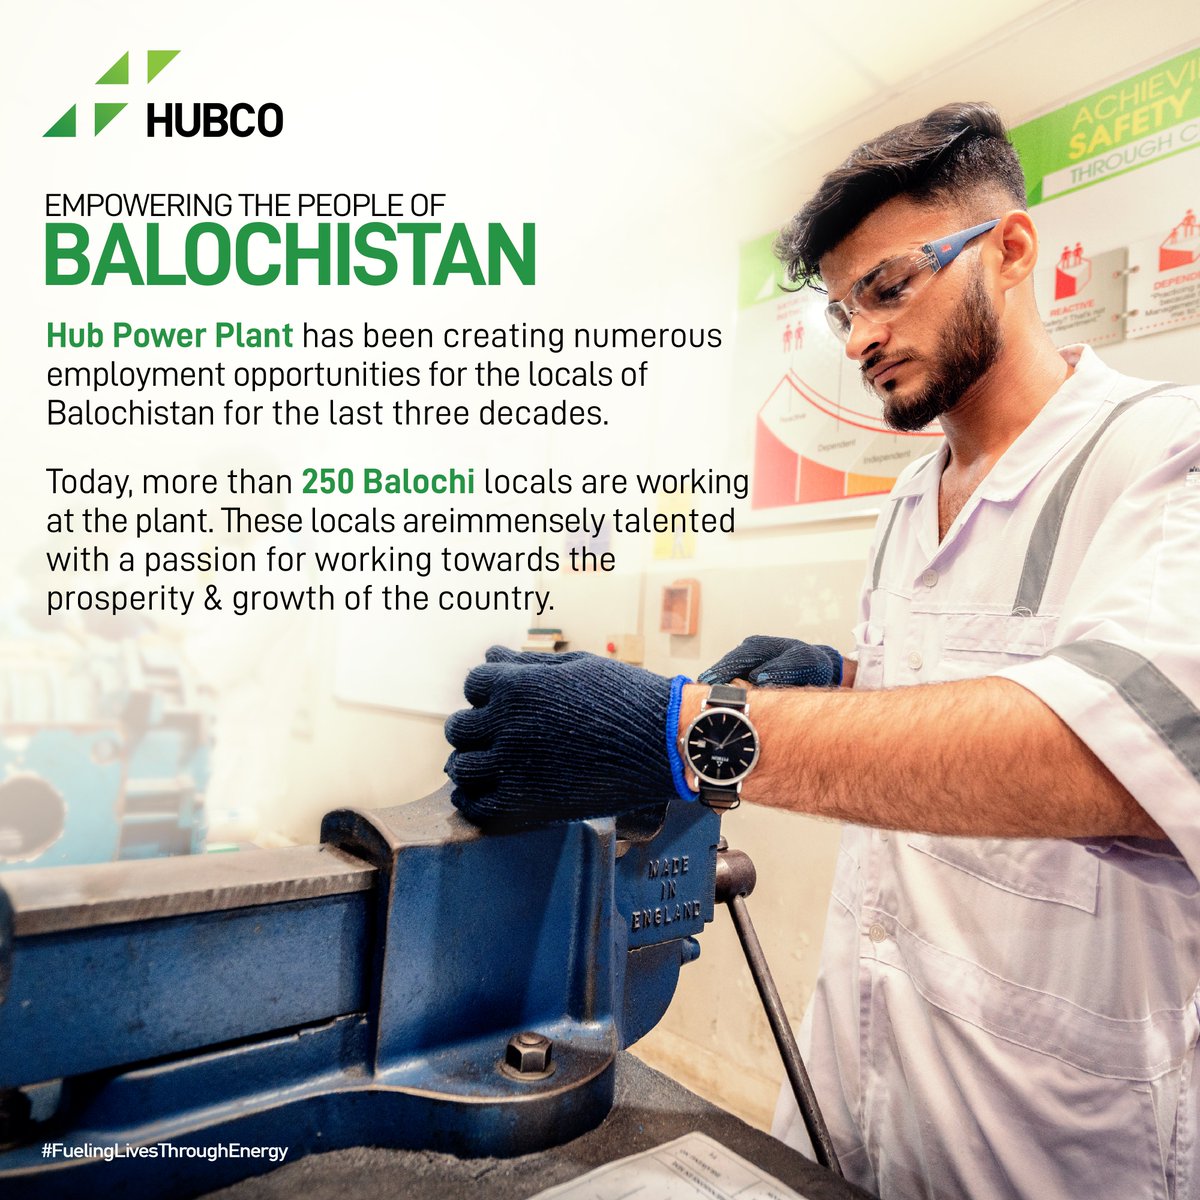 Established as the first and most efficient oil fired IPP in Pakistan, the Hub Power plant has been empowering the people of Balochistan by creating various employment opportunities.
#Hubco #FuelingLivesThroughEnergy #Balochistan #EmployementOpportunities